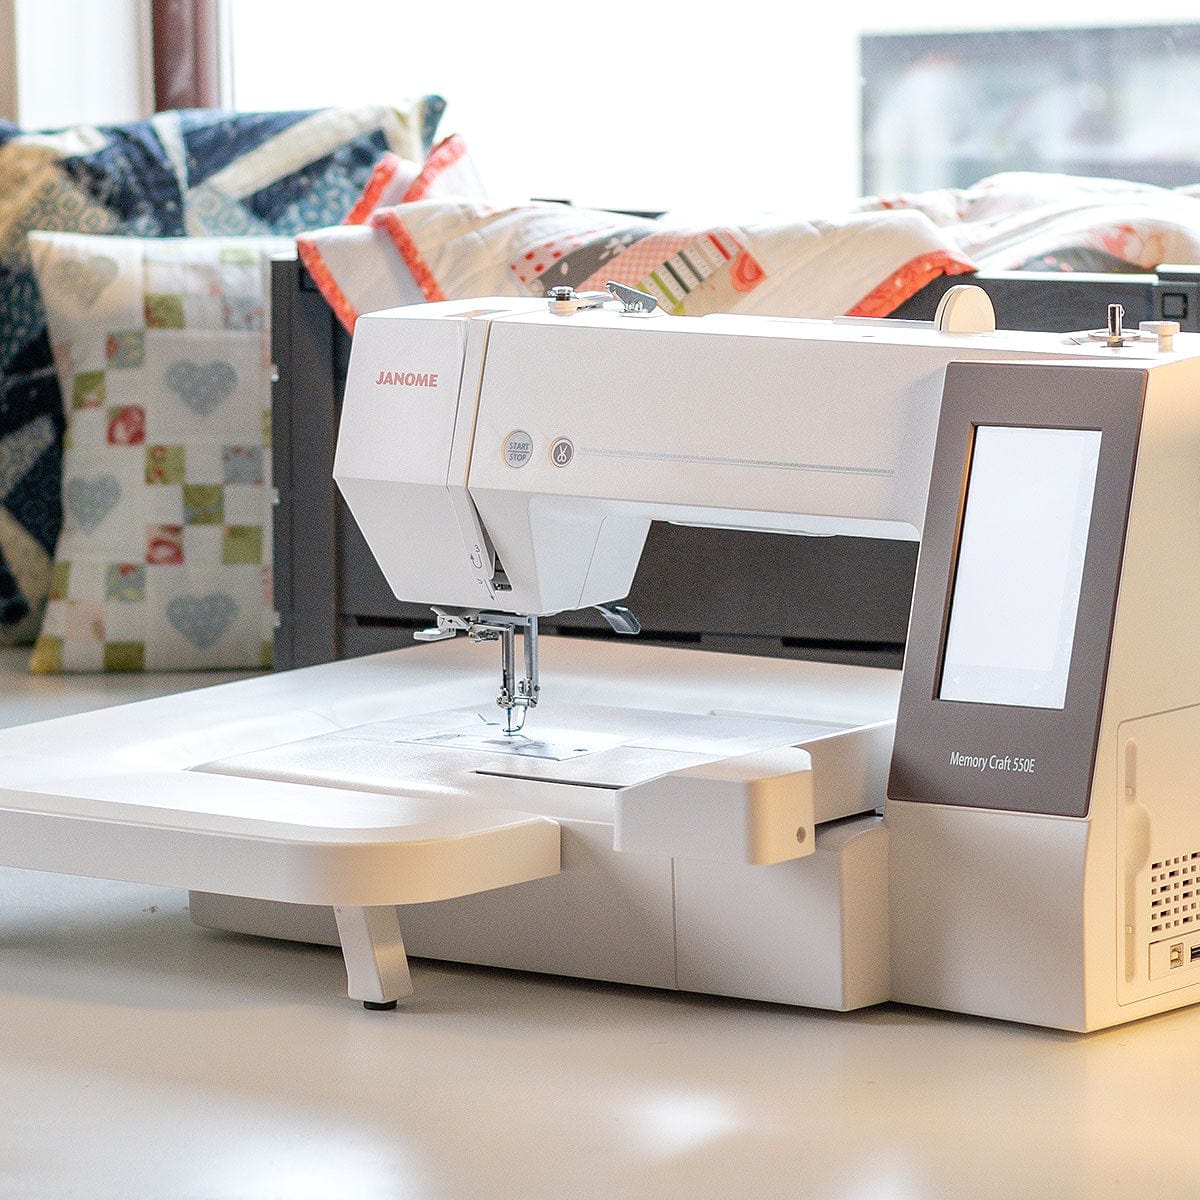 Janome Memory Craft 550E with table